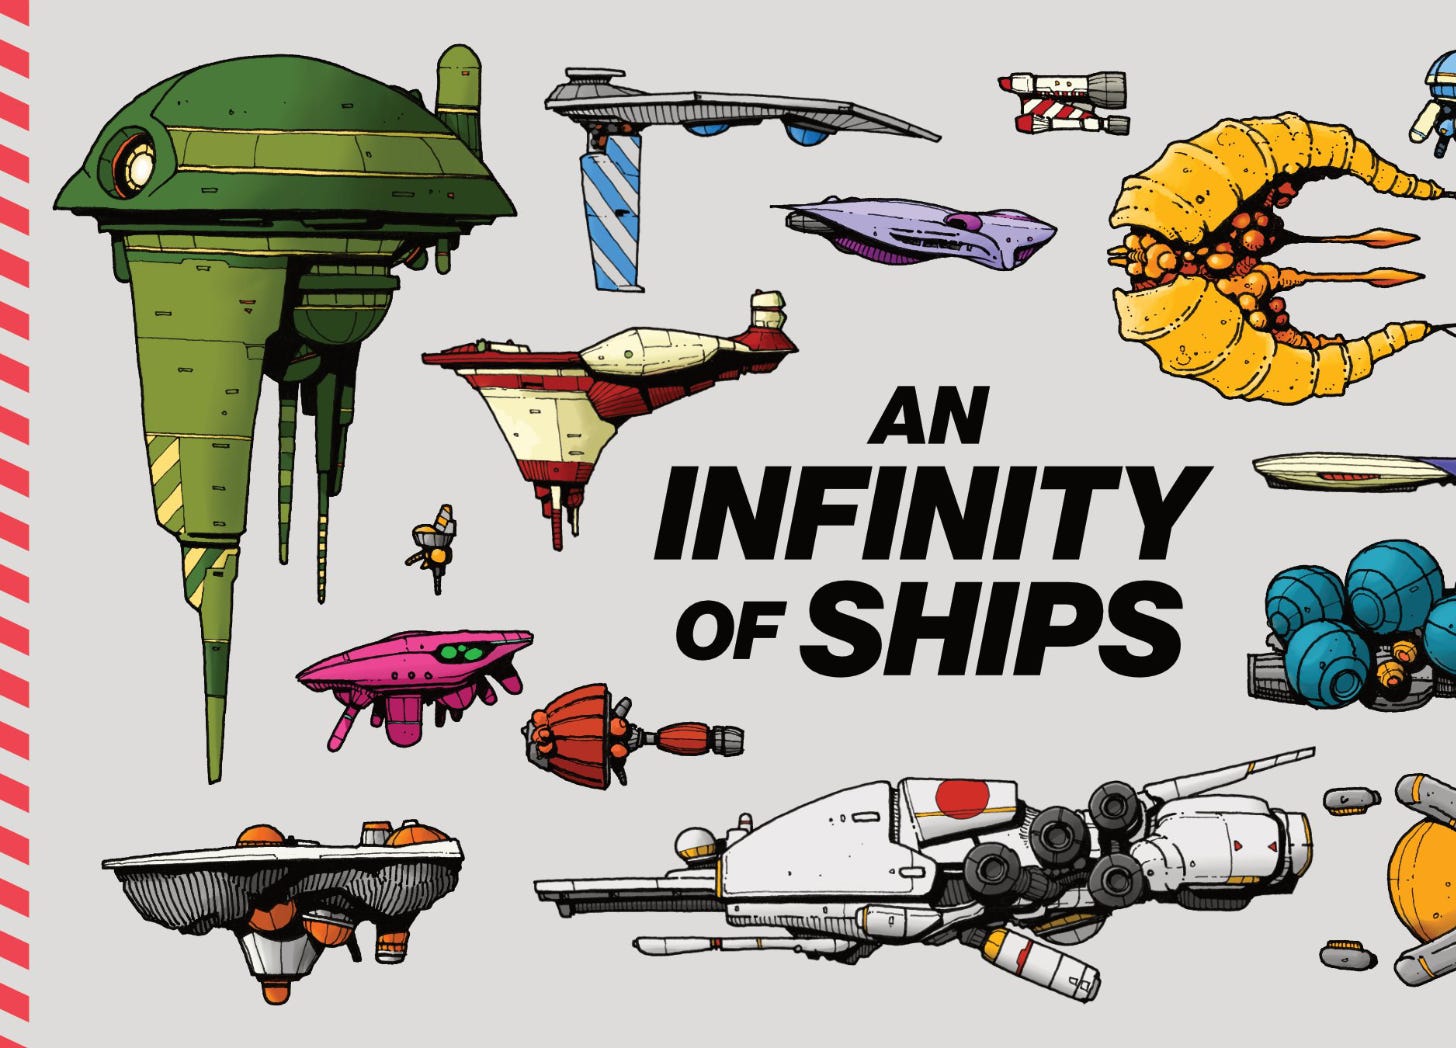 An Infinity of Ships title surrounded by a bunch of colorful spaceship illustrations of various designs.